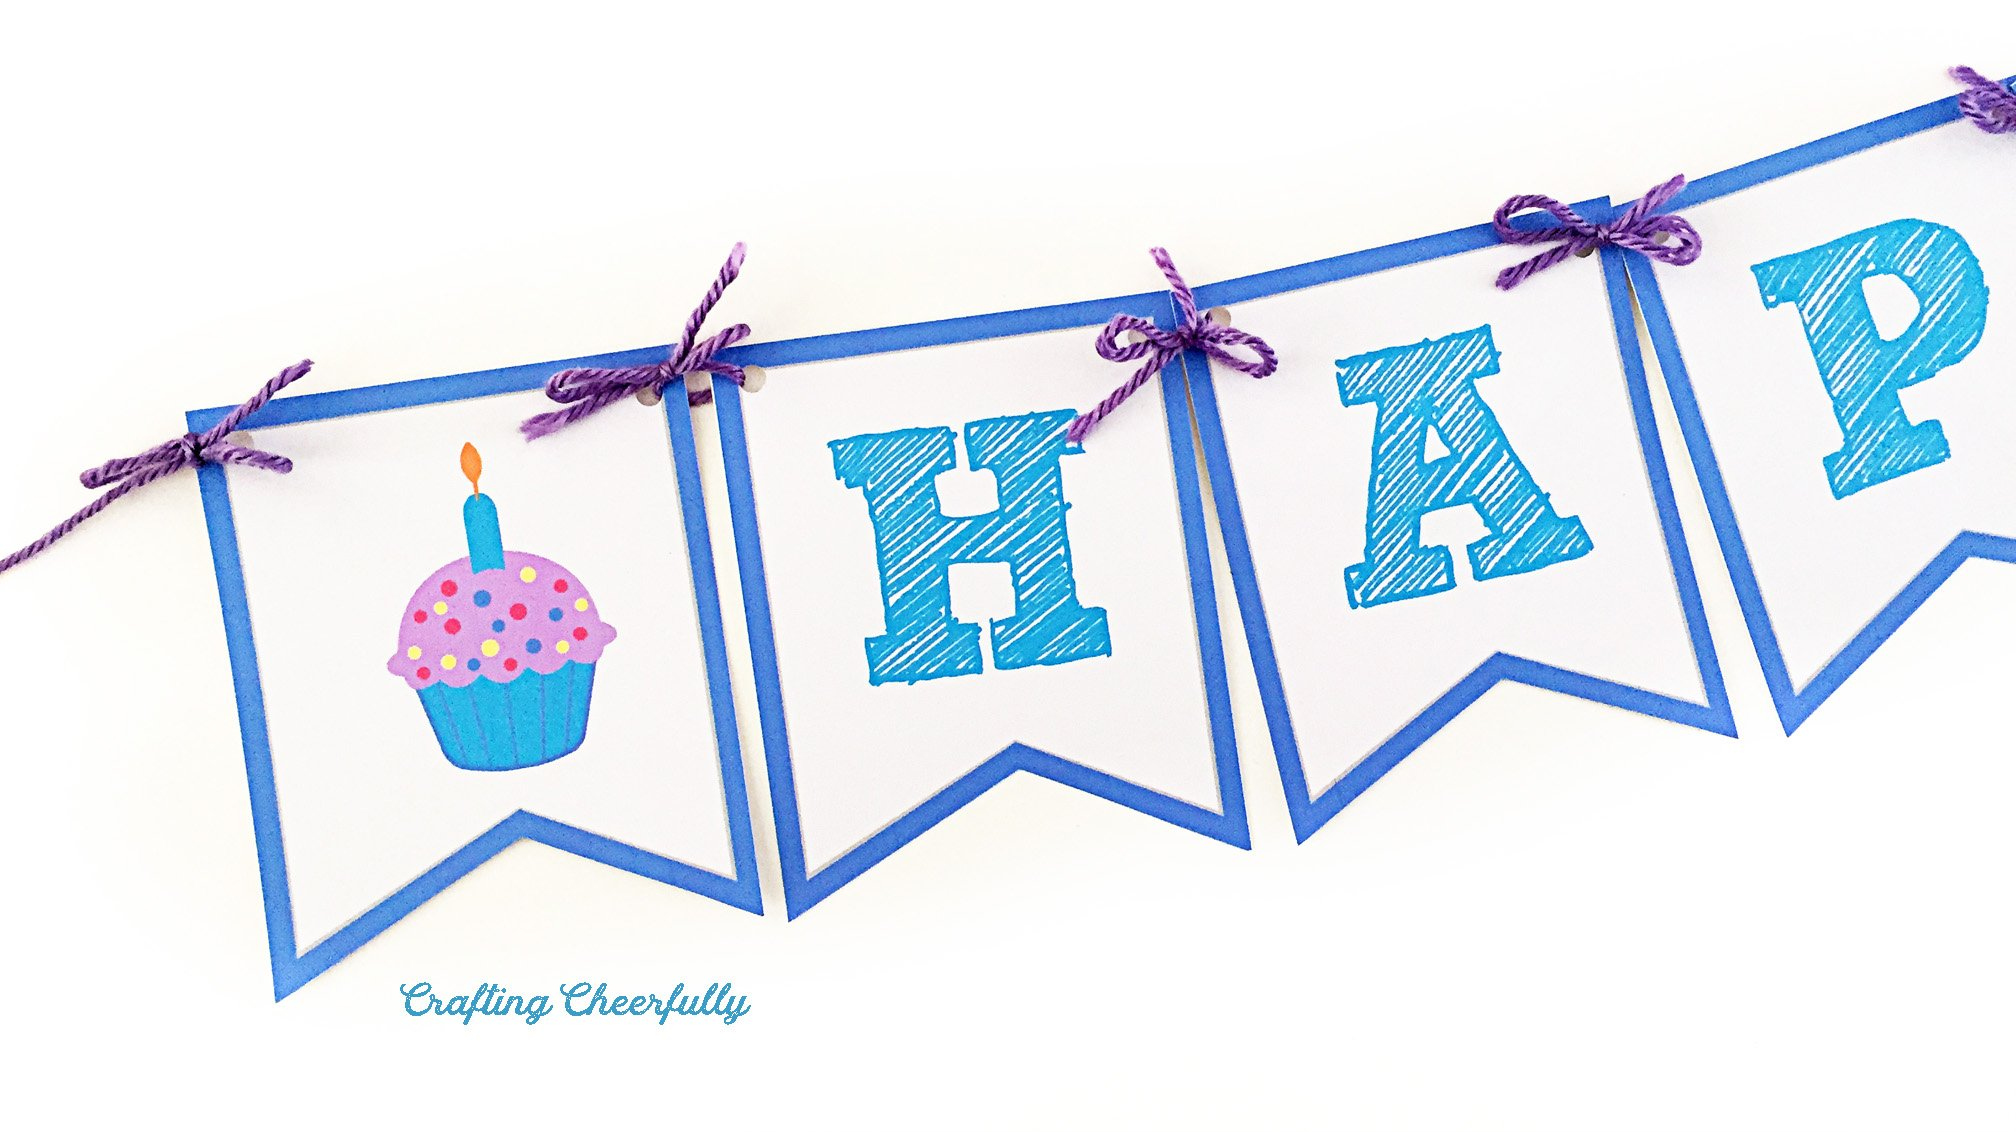 Free Printable Happy Birthday Banner! - Crafting Cheerfully regarding Free Printable Happy Birthday Banner Templates